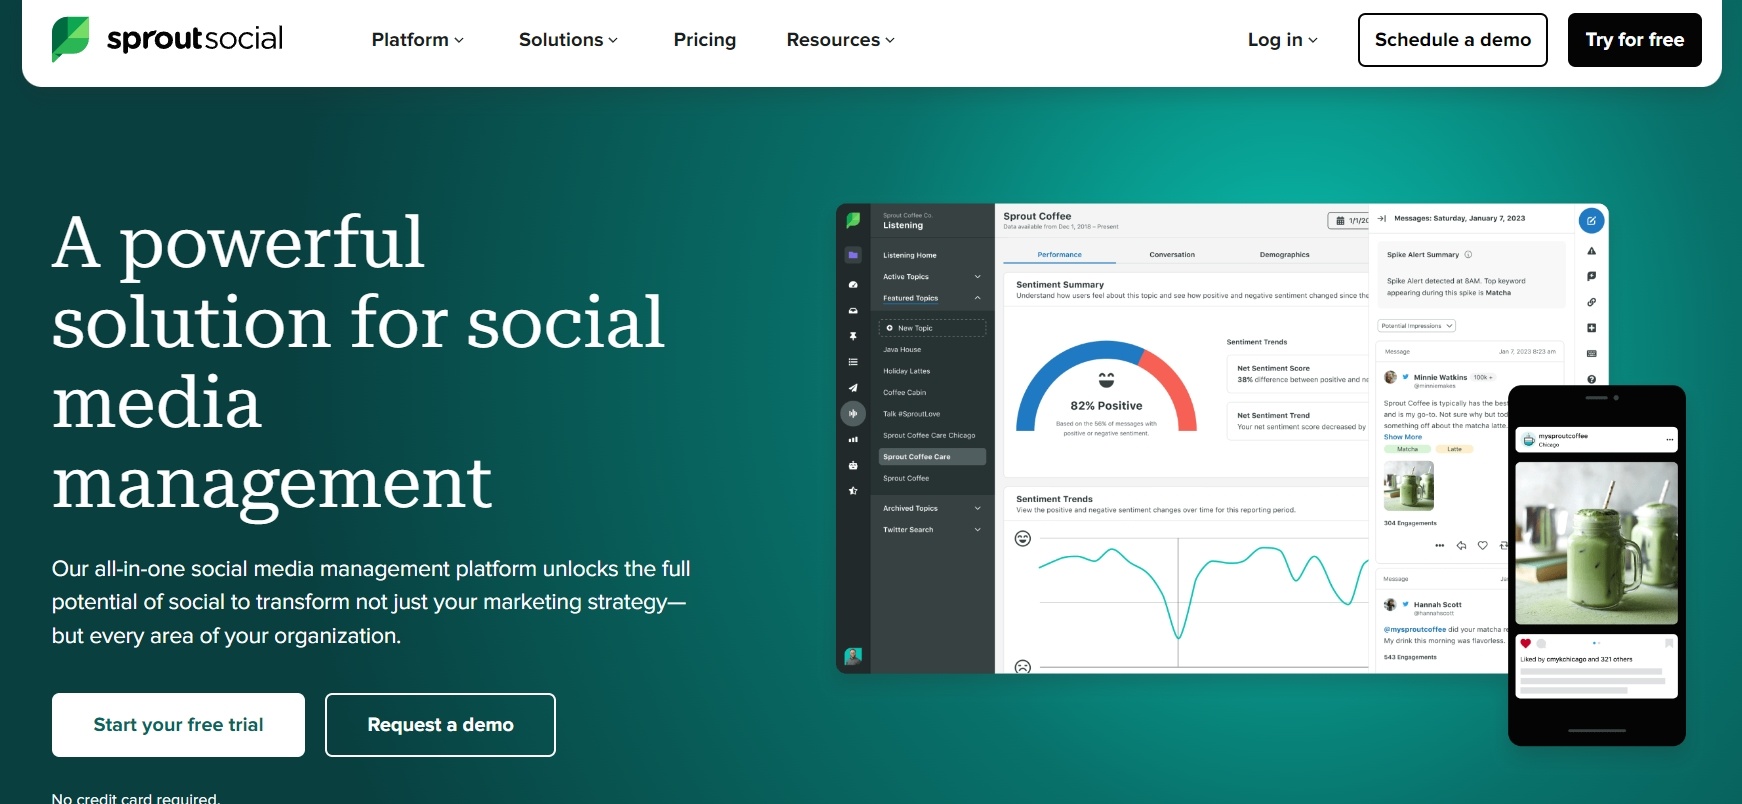 Sprout social Pinterest tool online